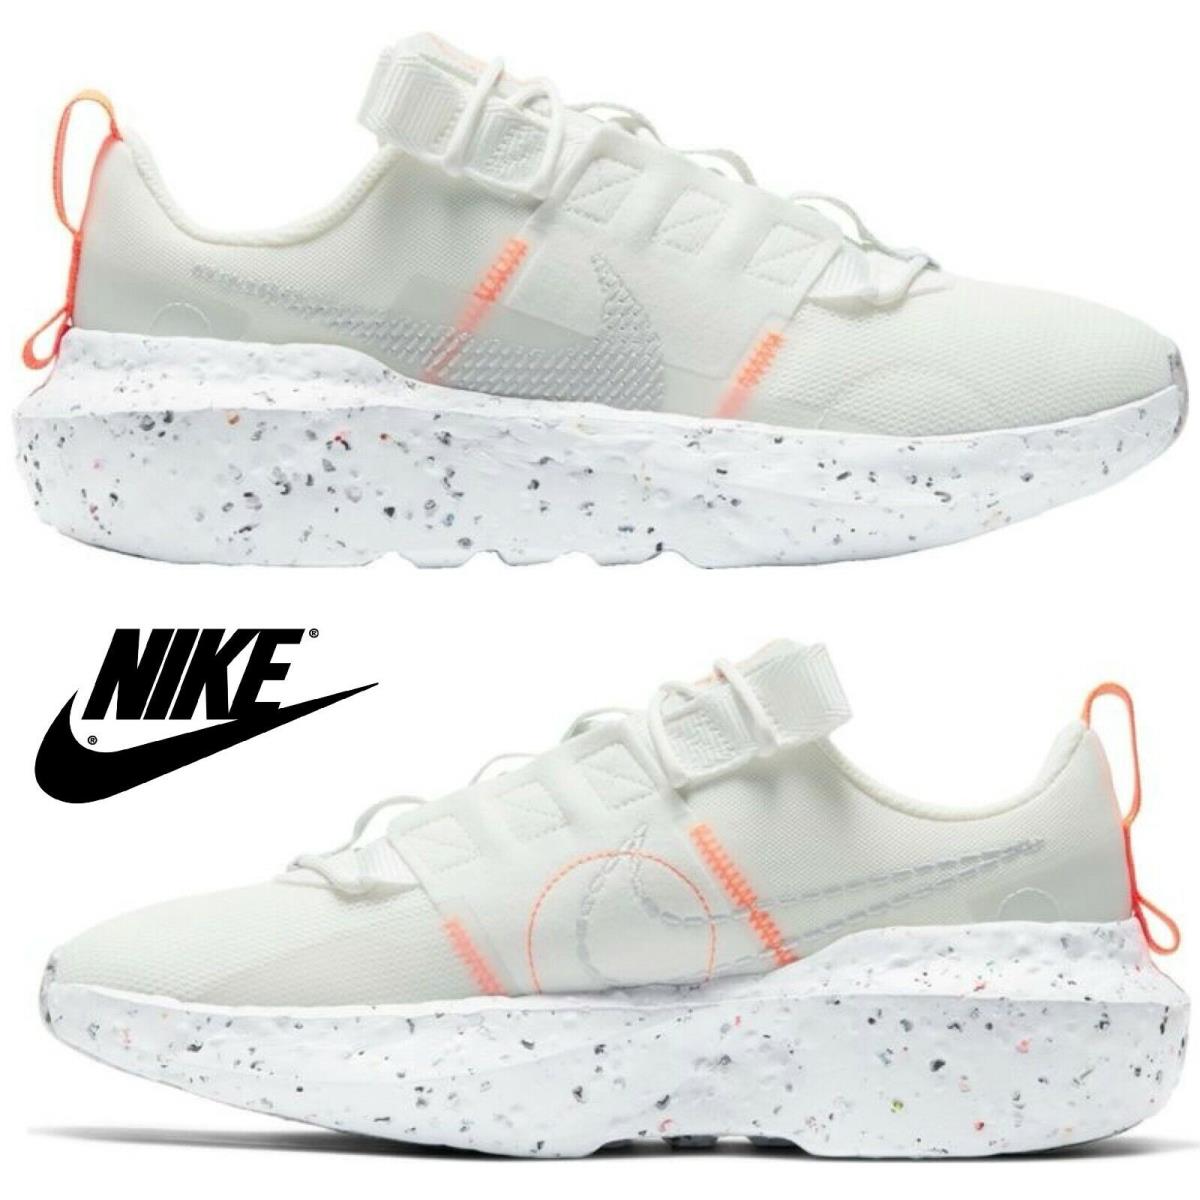 Nike Crater Impact Women s Sneakers Casual Shoes Premium Running Sport White - White, Manufacturer: SUMMIT WHT/GREY FOG/PLAT